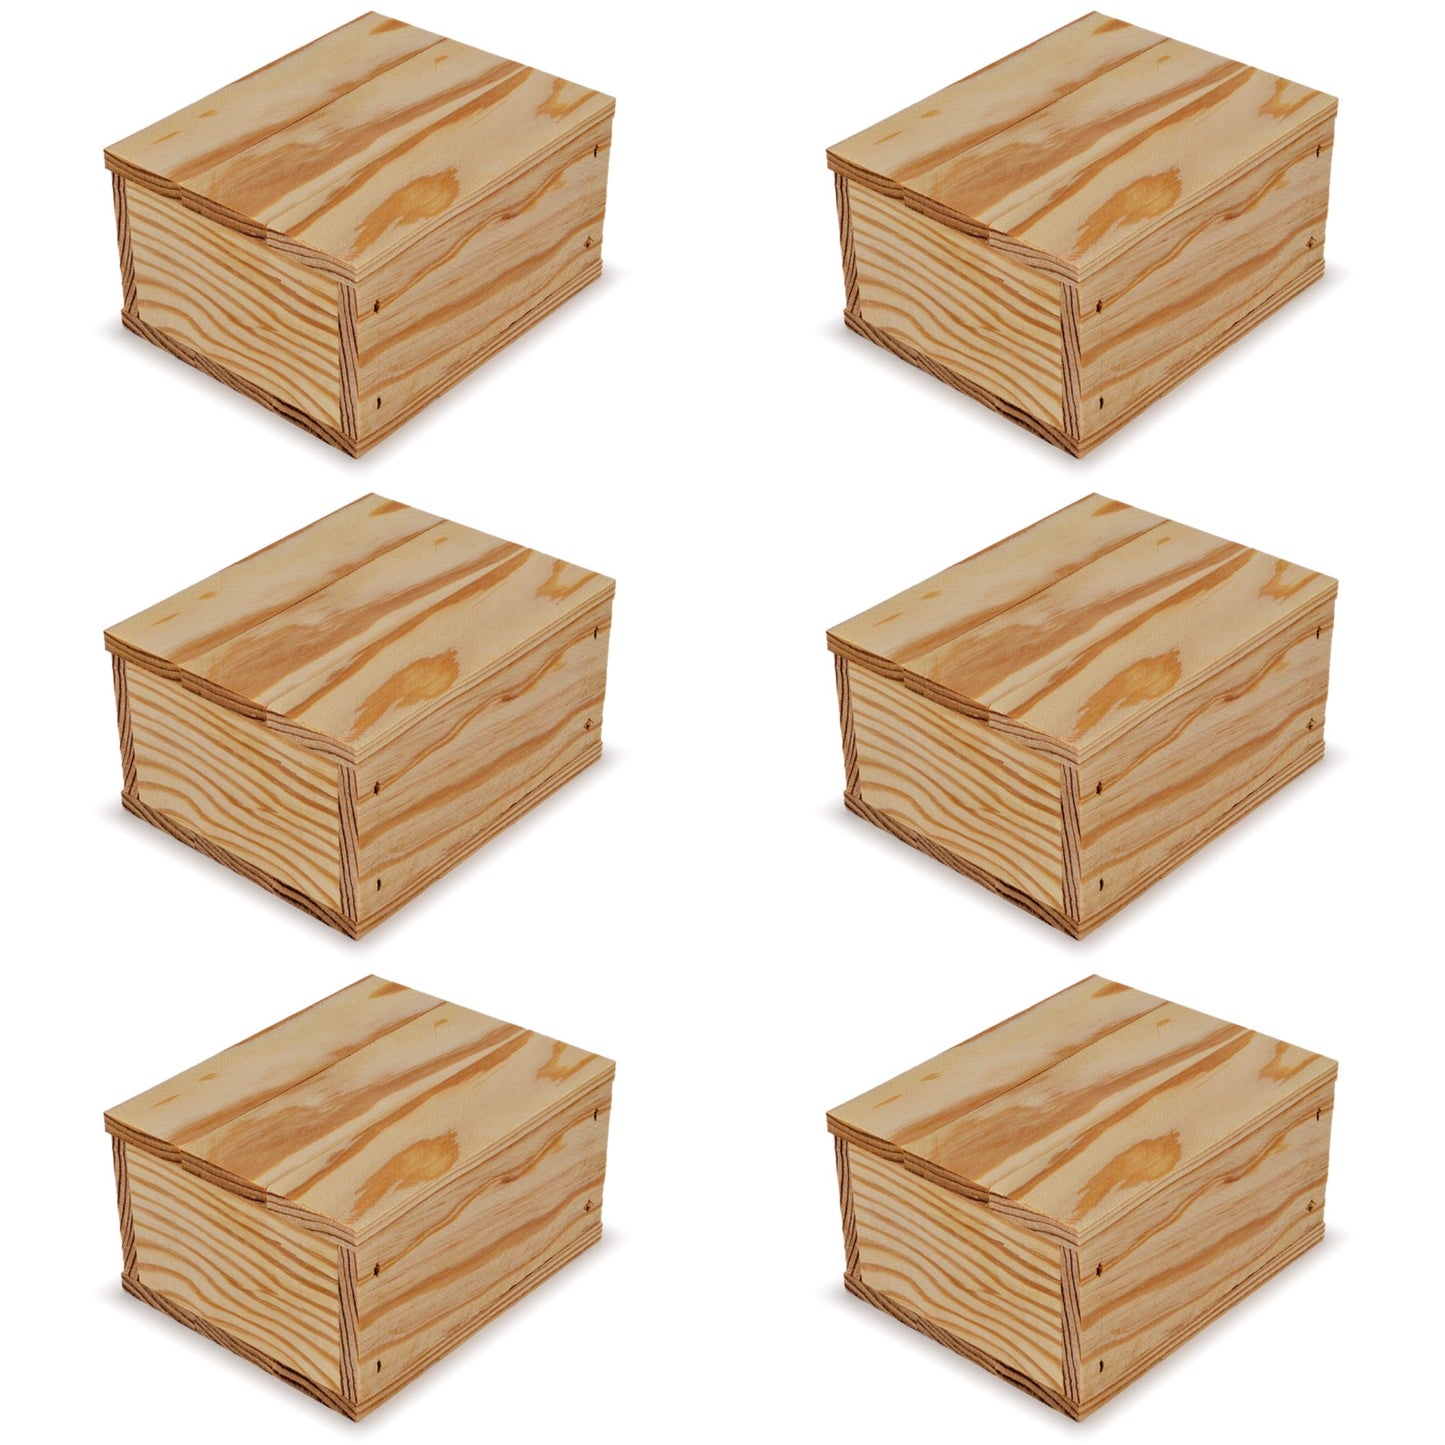 6 Small wooden crates with lid 5x4.5x2.75